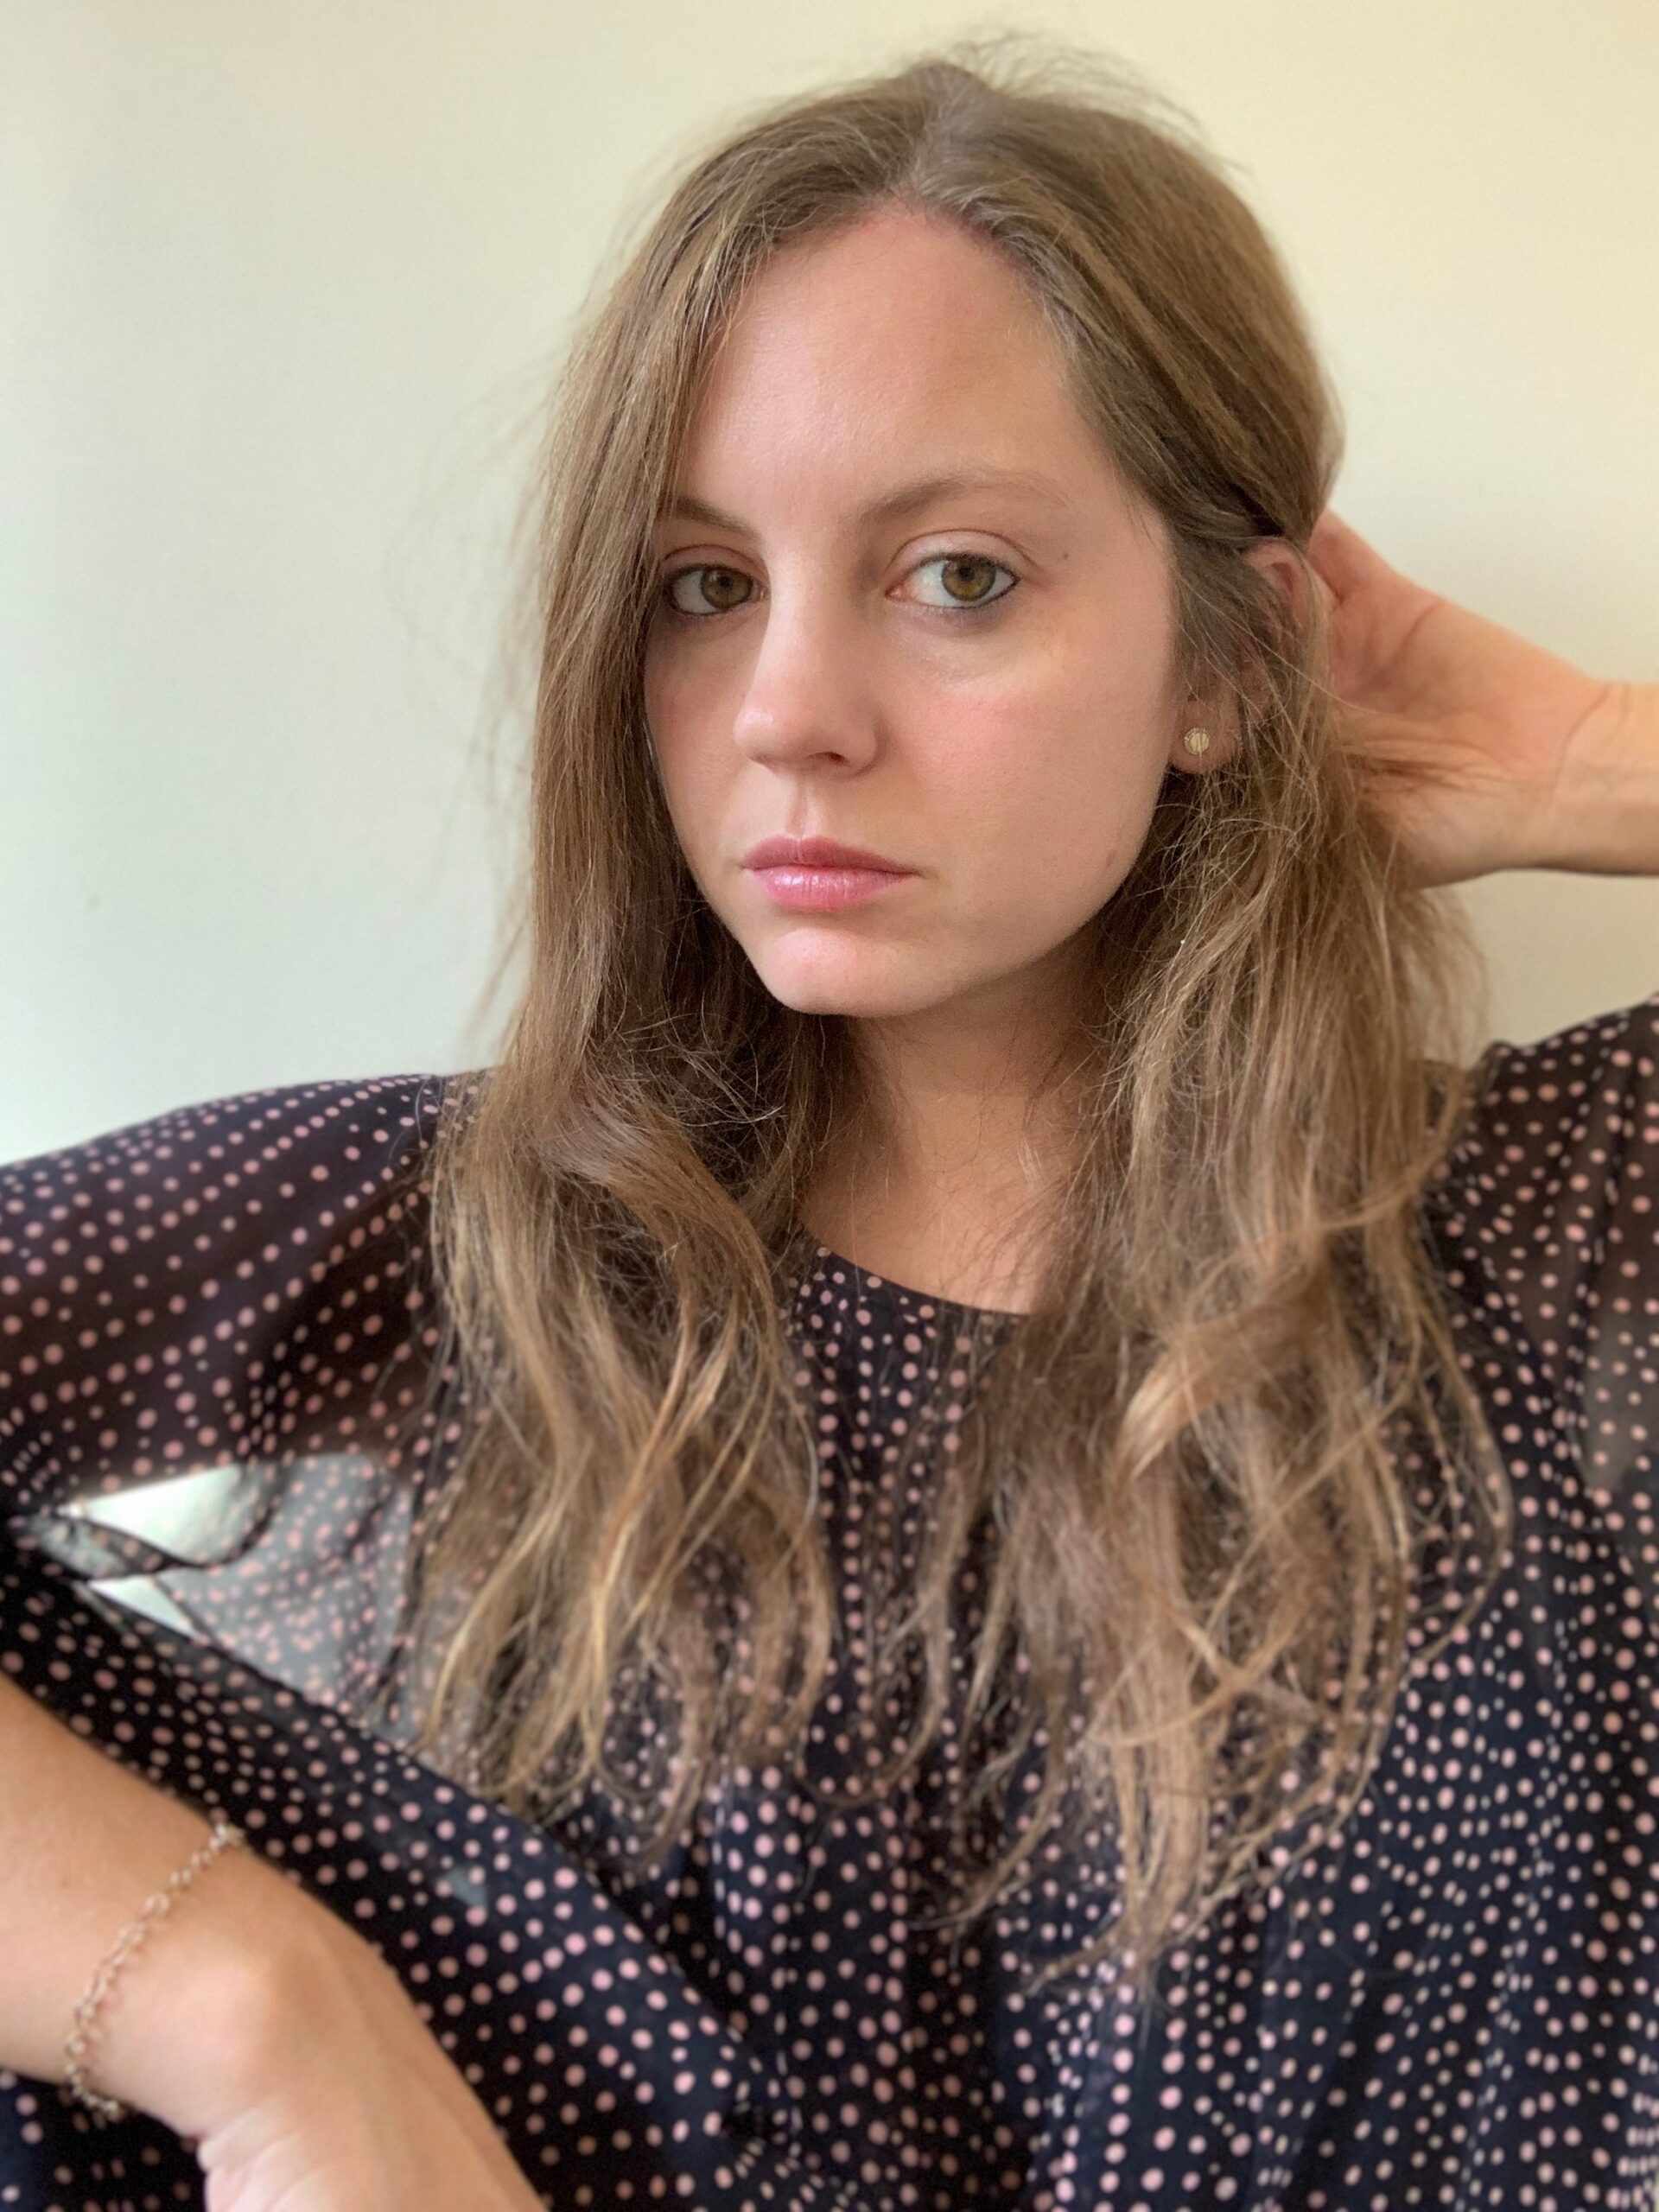 A woman with long, wavy brown hair wearing a black polka dot shirt looks at the camera while touching her hair. She has a neutral expression and is positioned against a plain background.